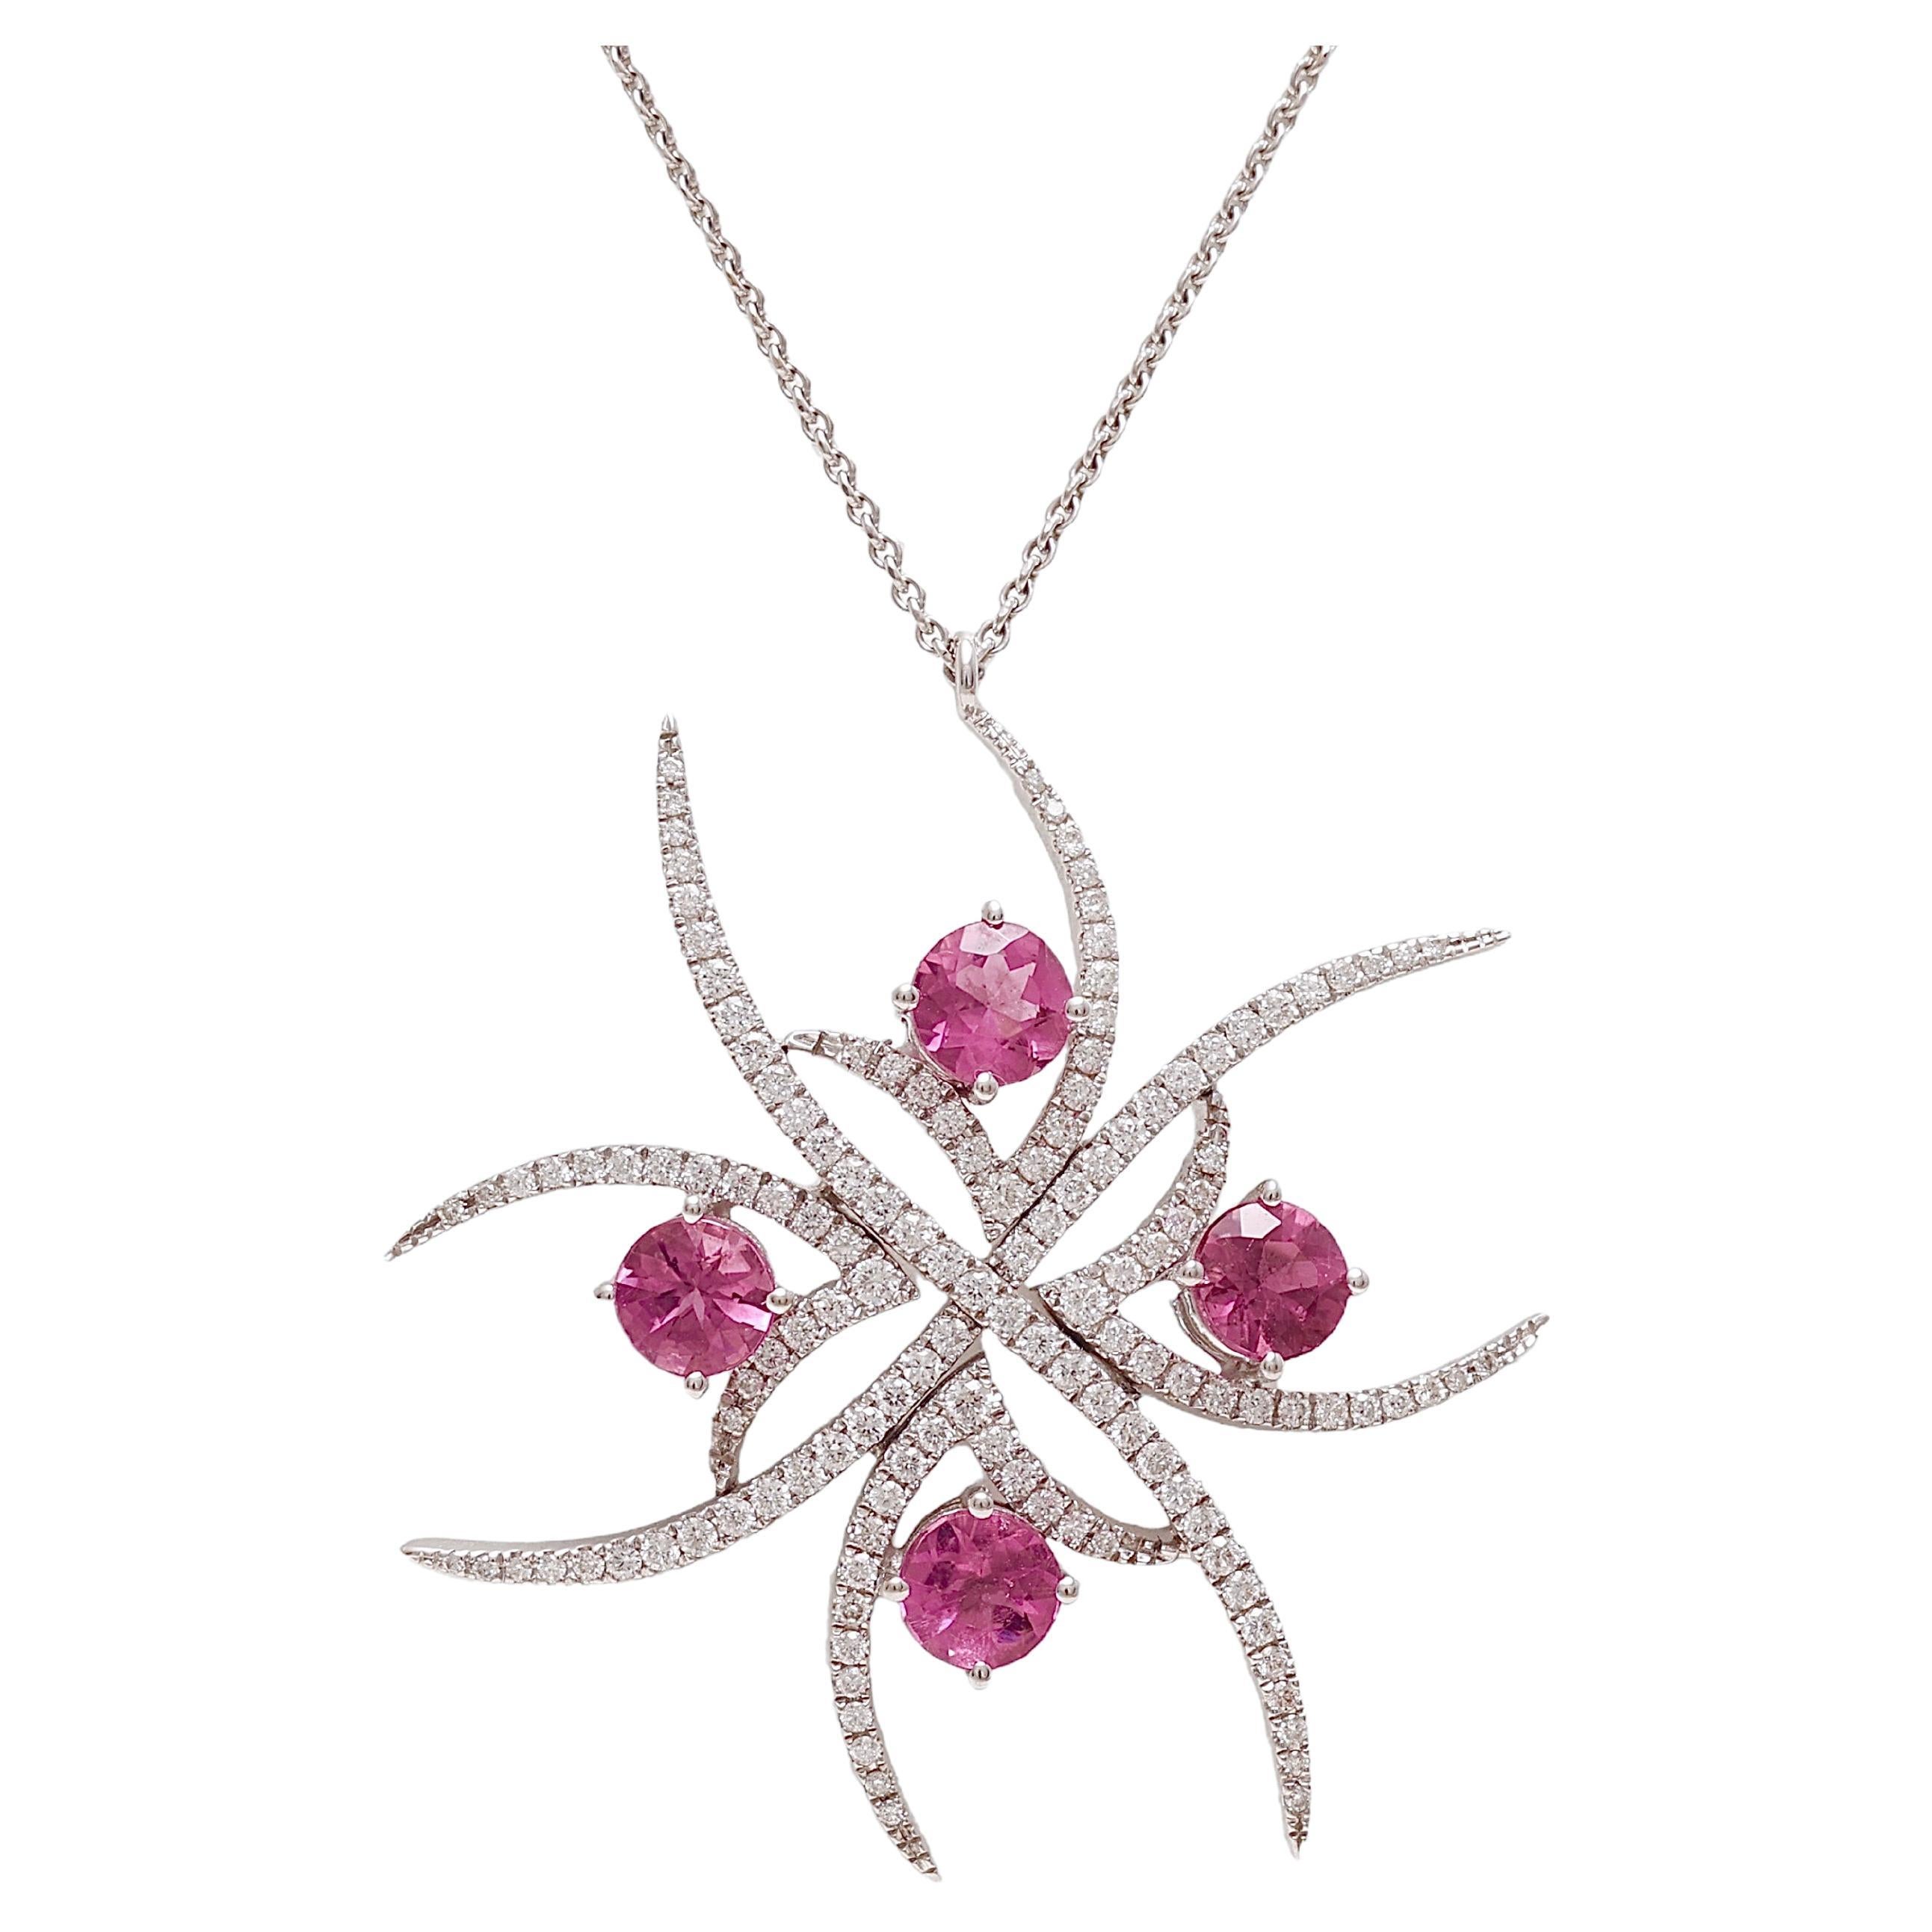 18kt Necklace With 2Ct Pink Amethyst Gemstones Surrounded by 1.02 Ct. Diamonds